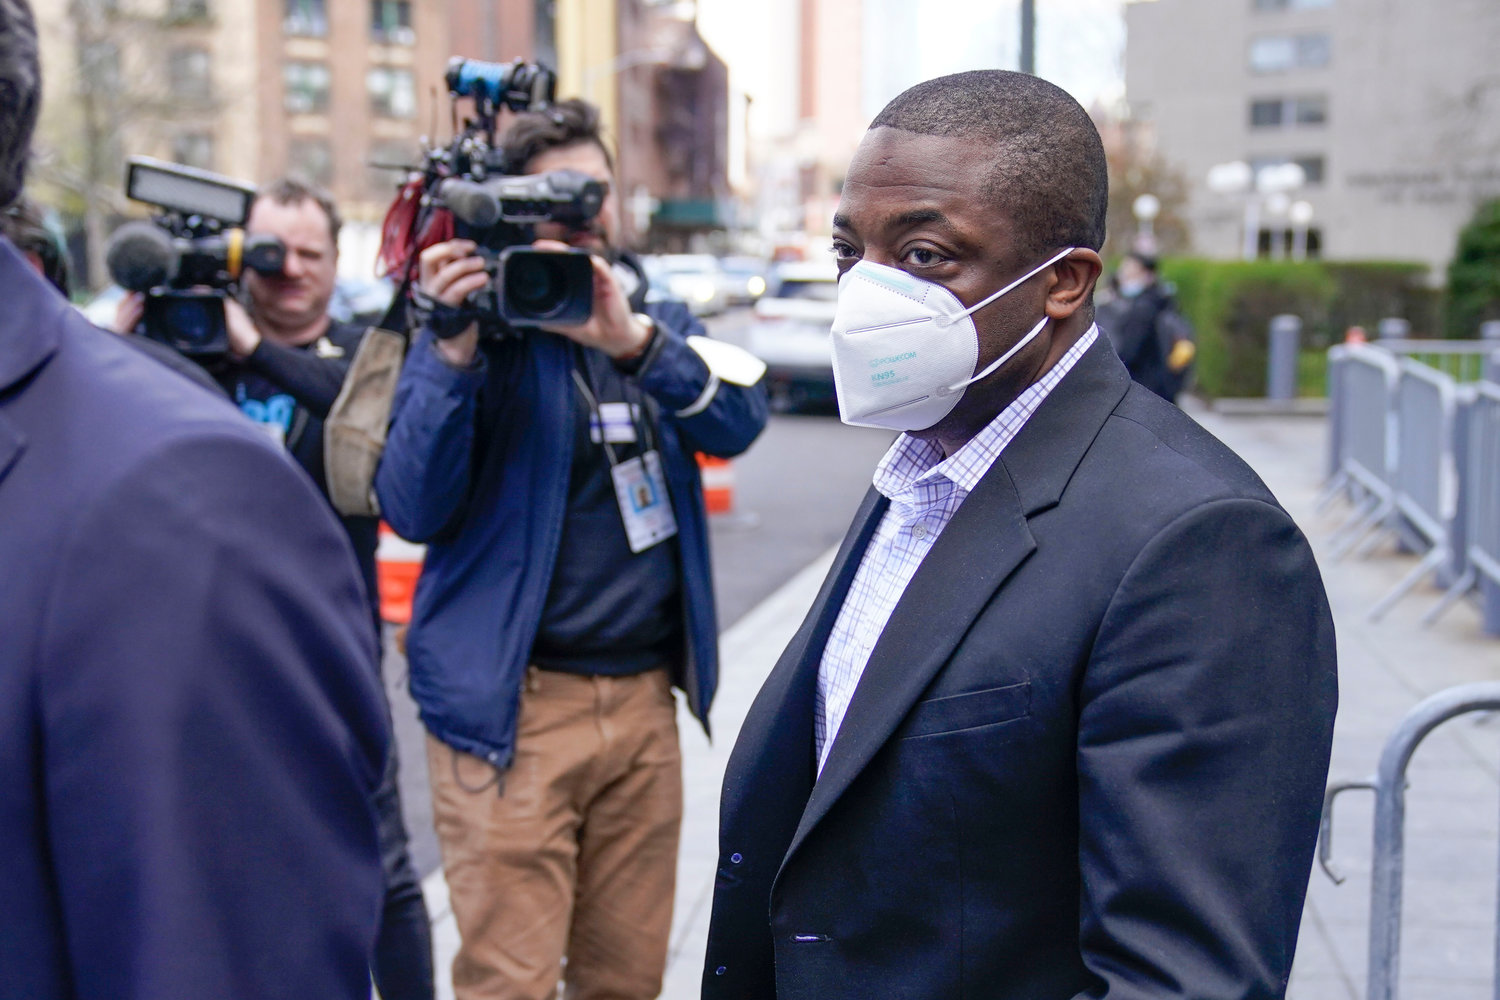 New York Lt. Gov. Brian Benjamin leaves the courthouse in New York, Tuesday, April 12, 2022. Benjamin has been arrested in a federal corruption investigation. Authorities said the Democrat was arrested Tuesday on charges including bribery and falsification of records. (AP Photo/Seth Wenig)